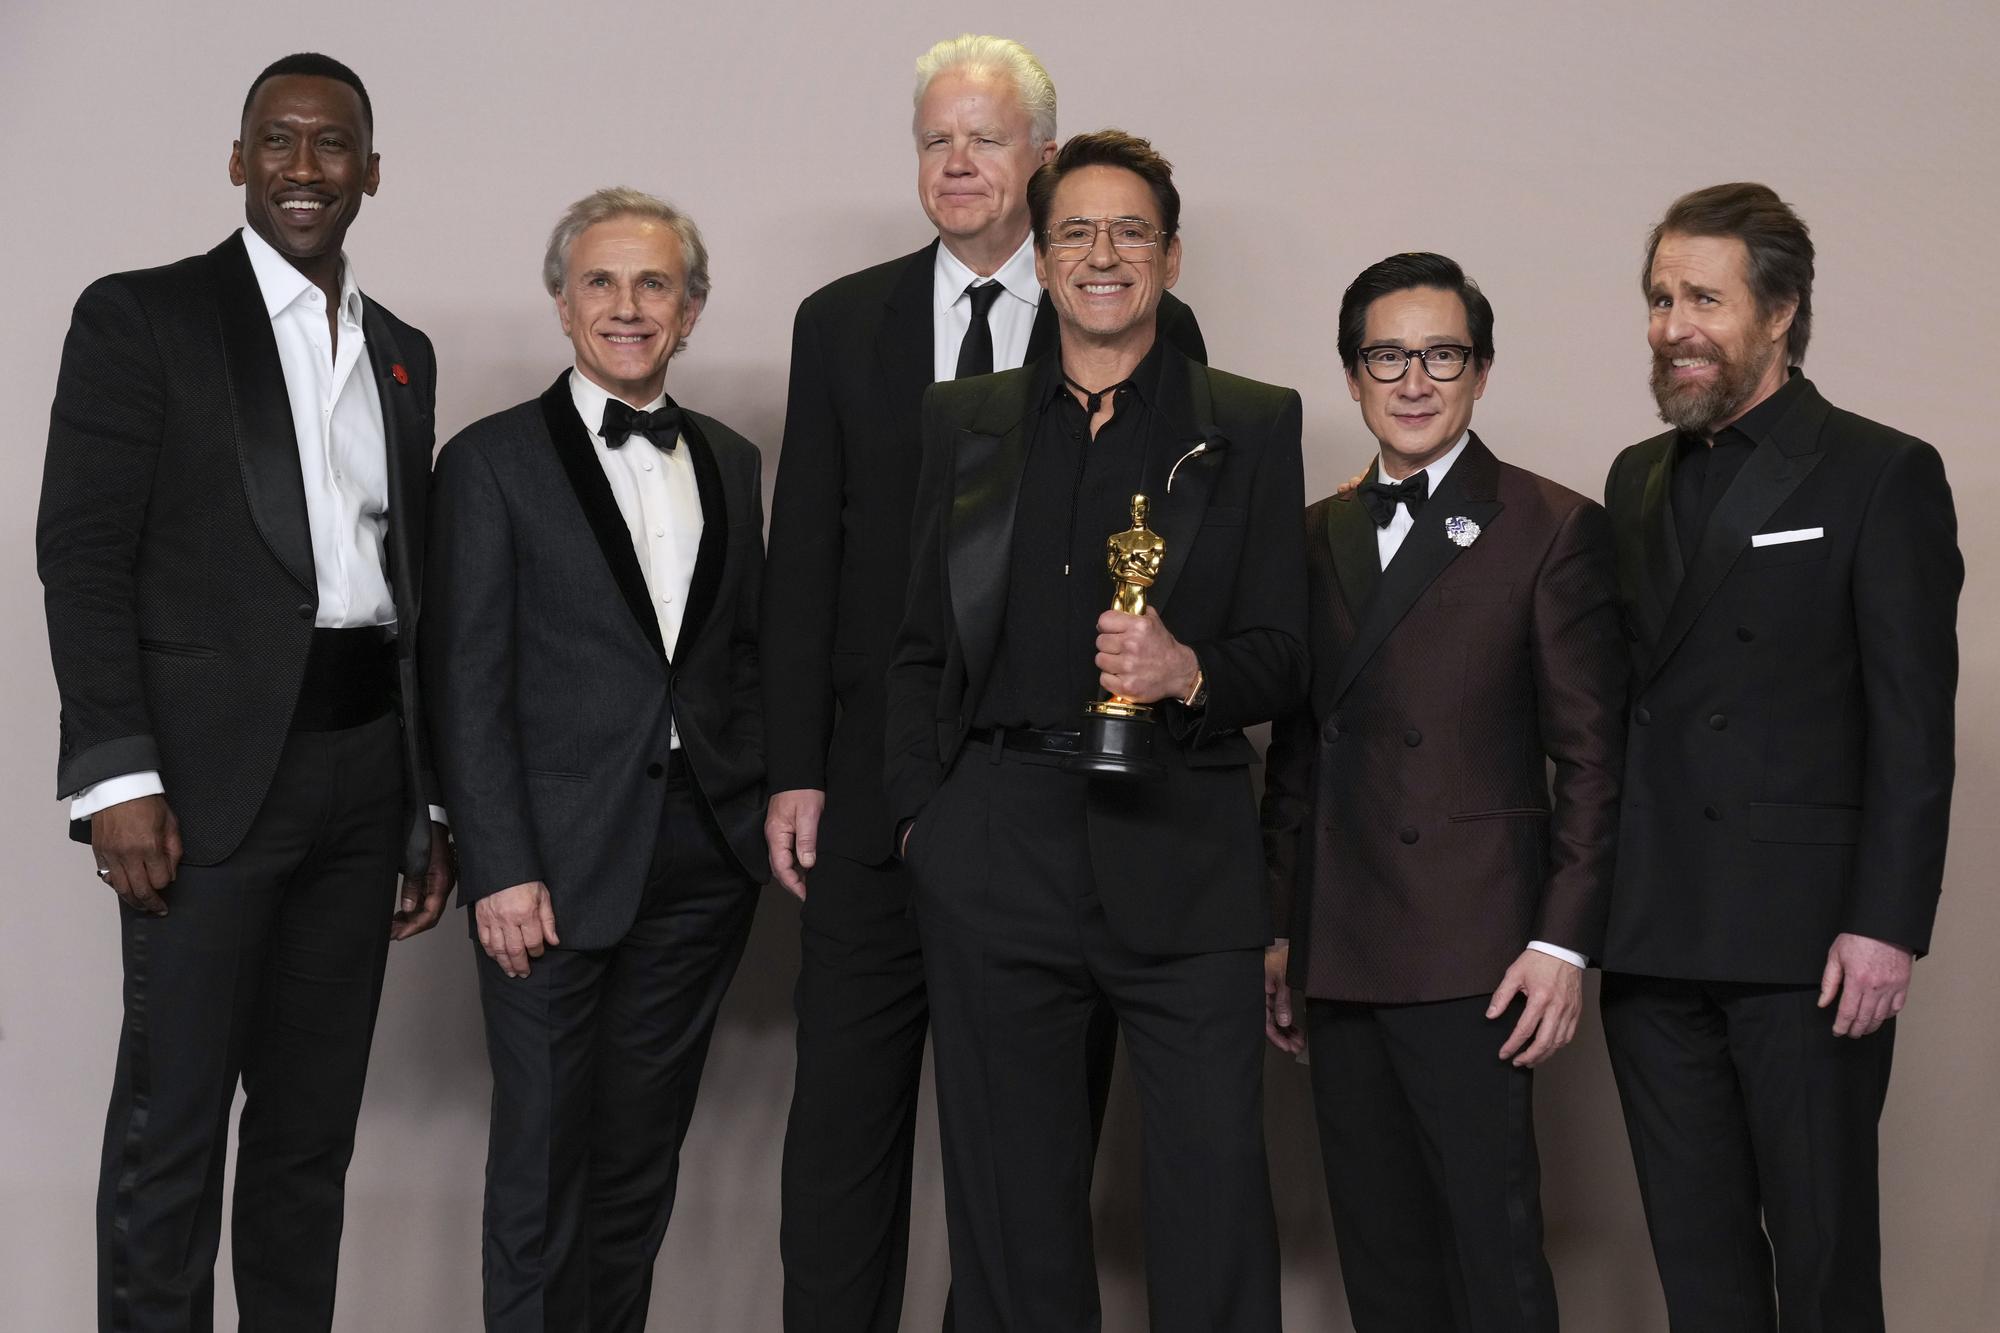 Robert Downey Jr., center right, winner of the award for best performance by an actor in a supporting role for "Oppenheimer," poses in the press room with Mahershala Ali, from left, Christoph Waltz, Tim Robbins, Ke Huy Quan, and Sam Rockwell at the Oscars on Sunday, March 10, 2024, at the Dolby Theatre in Los Angeles. (Photo by Jordan Strauss/Invision/AP) Associated Press/LaPresse Only Italy and Spain / EDITORIAL USE ONLY/ONLY ITALY AND SPAIN